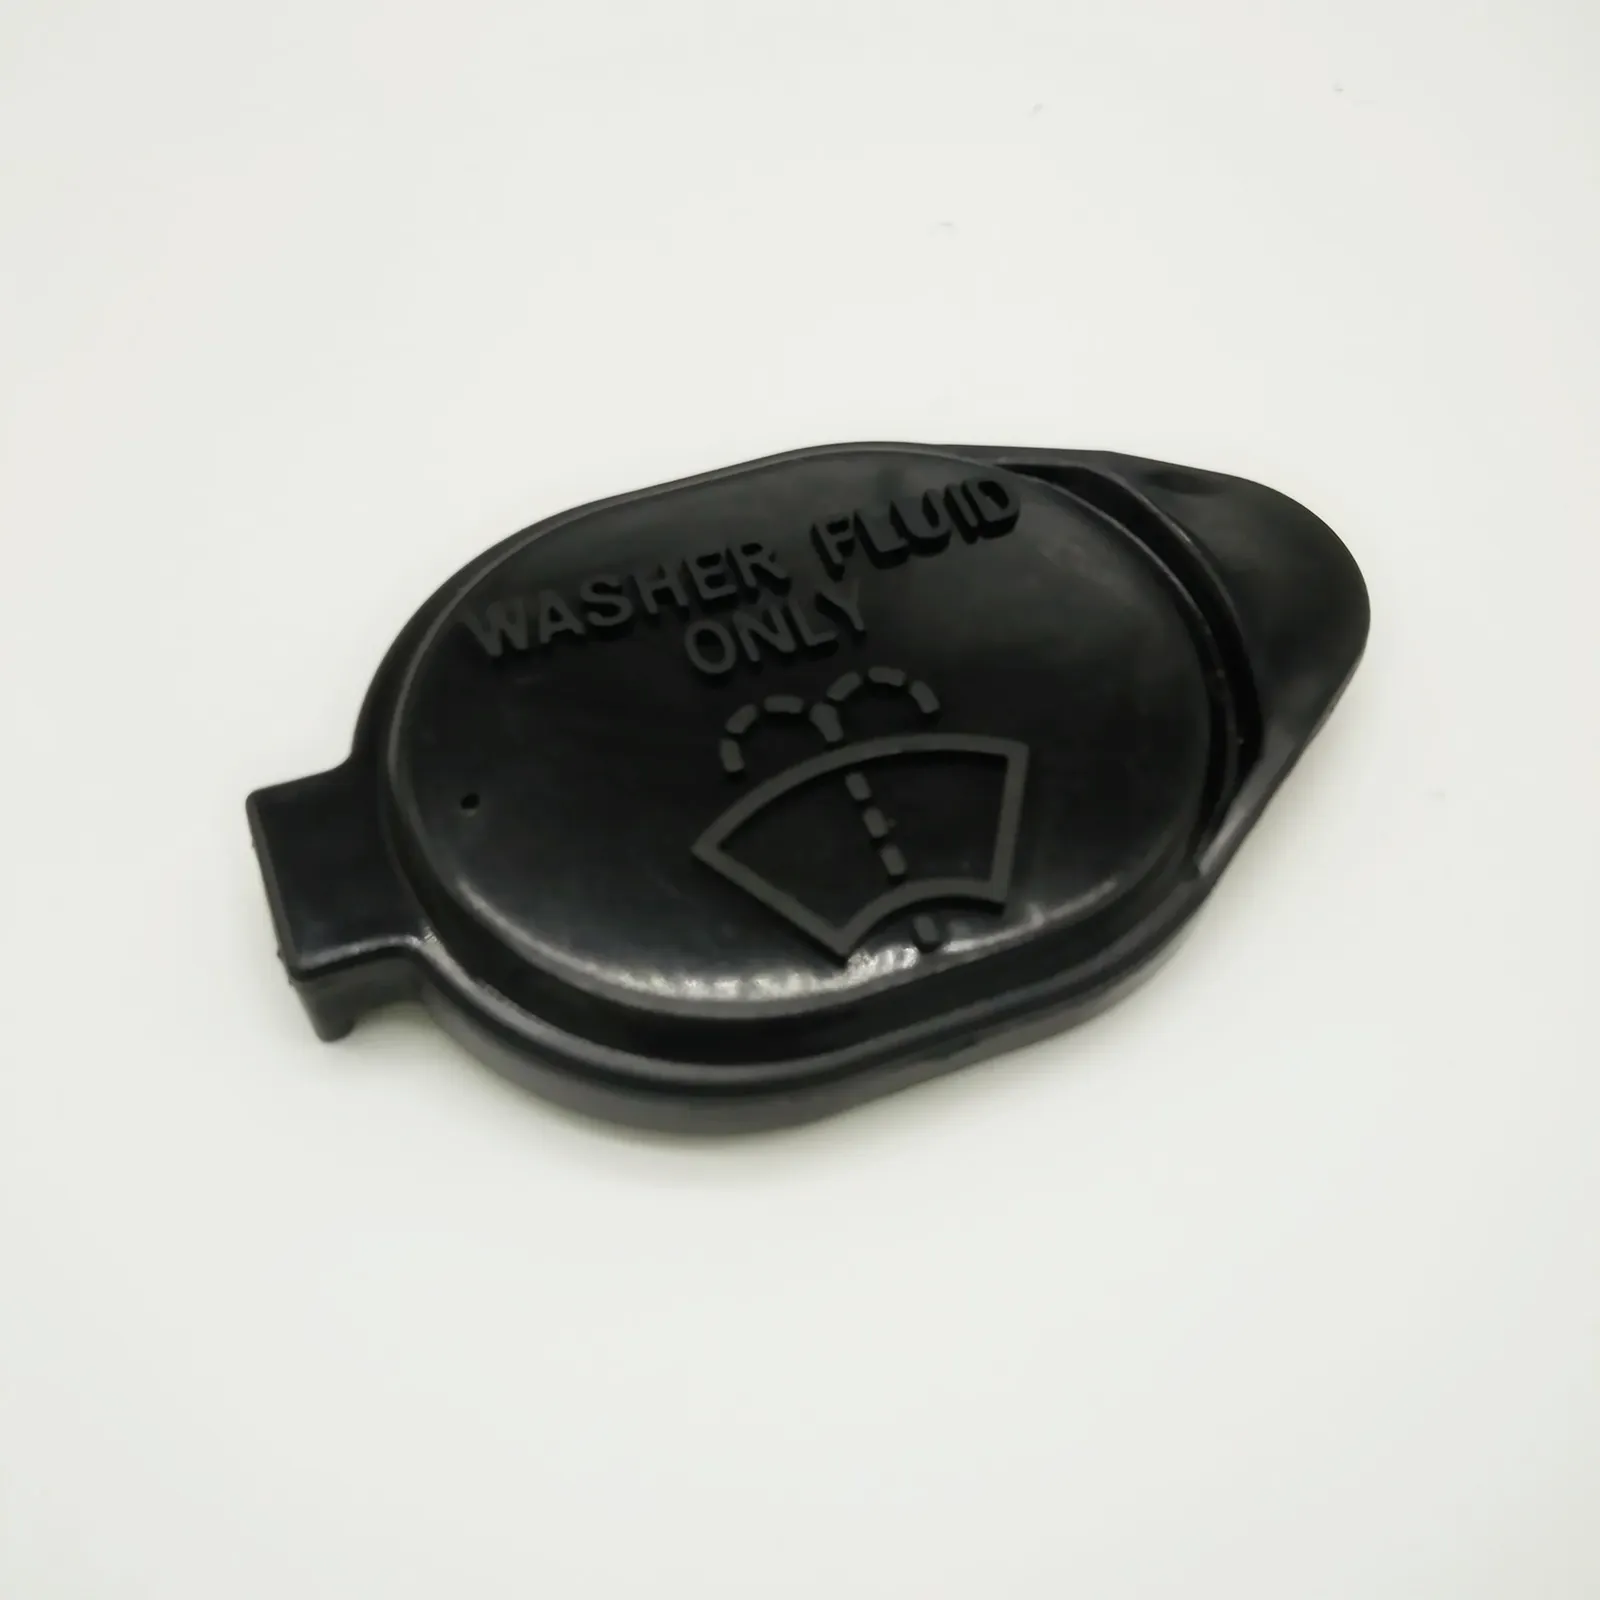 Car glass water tank cover wiper cover spray bottle cap 85316-02200 8531602200 for Toyota Corolla